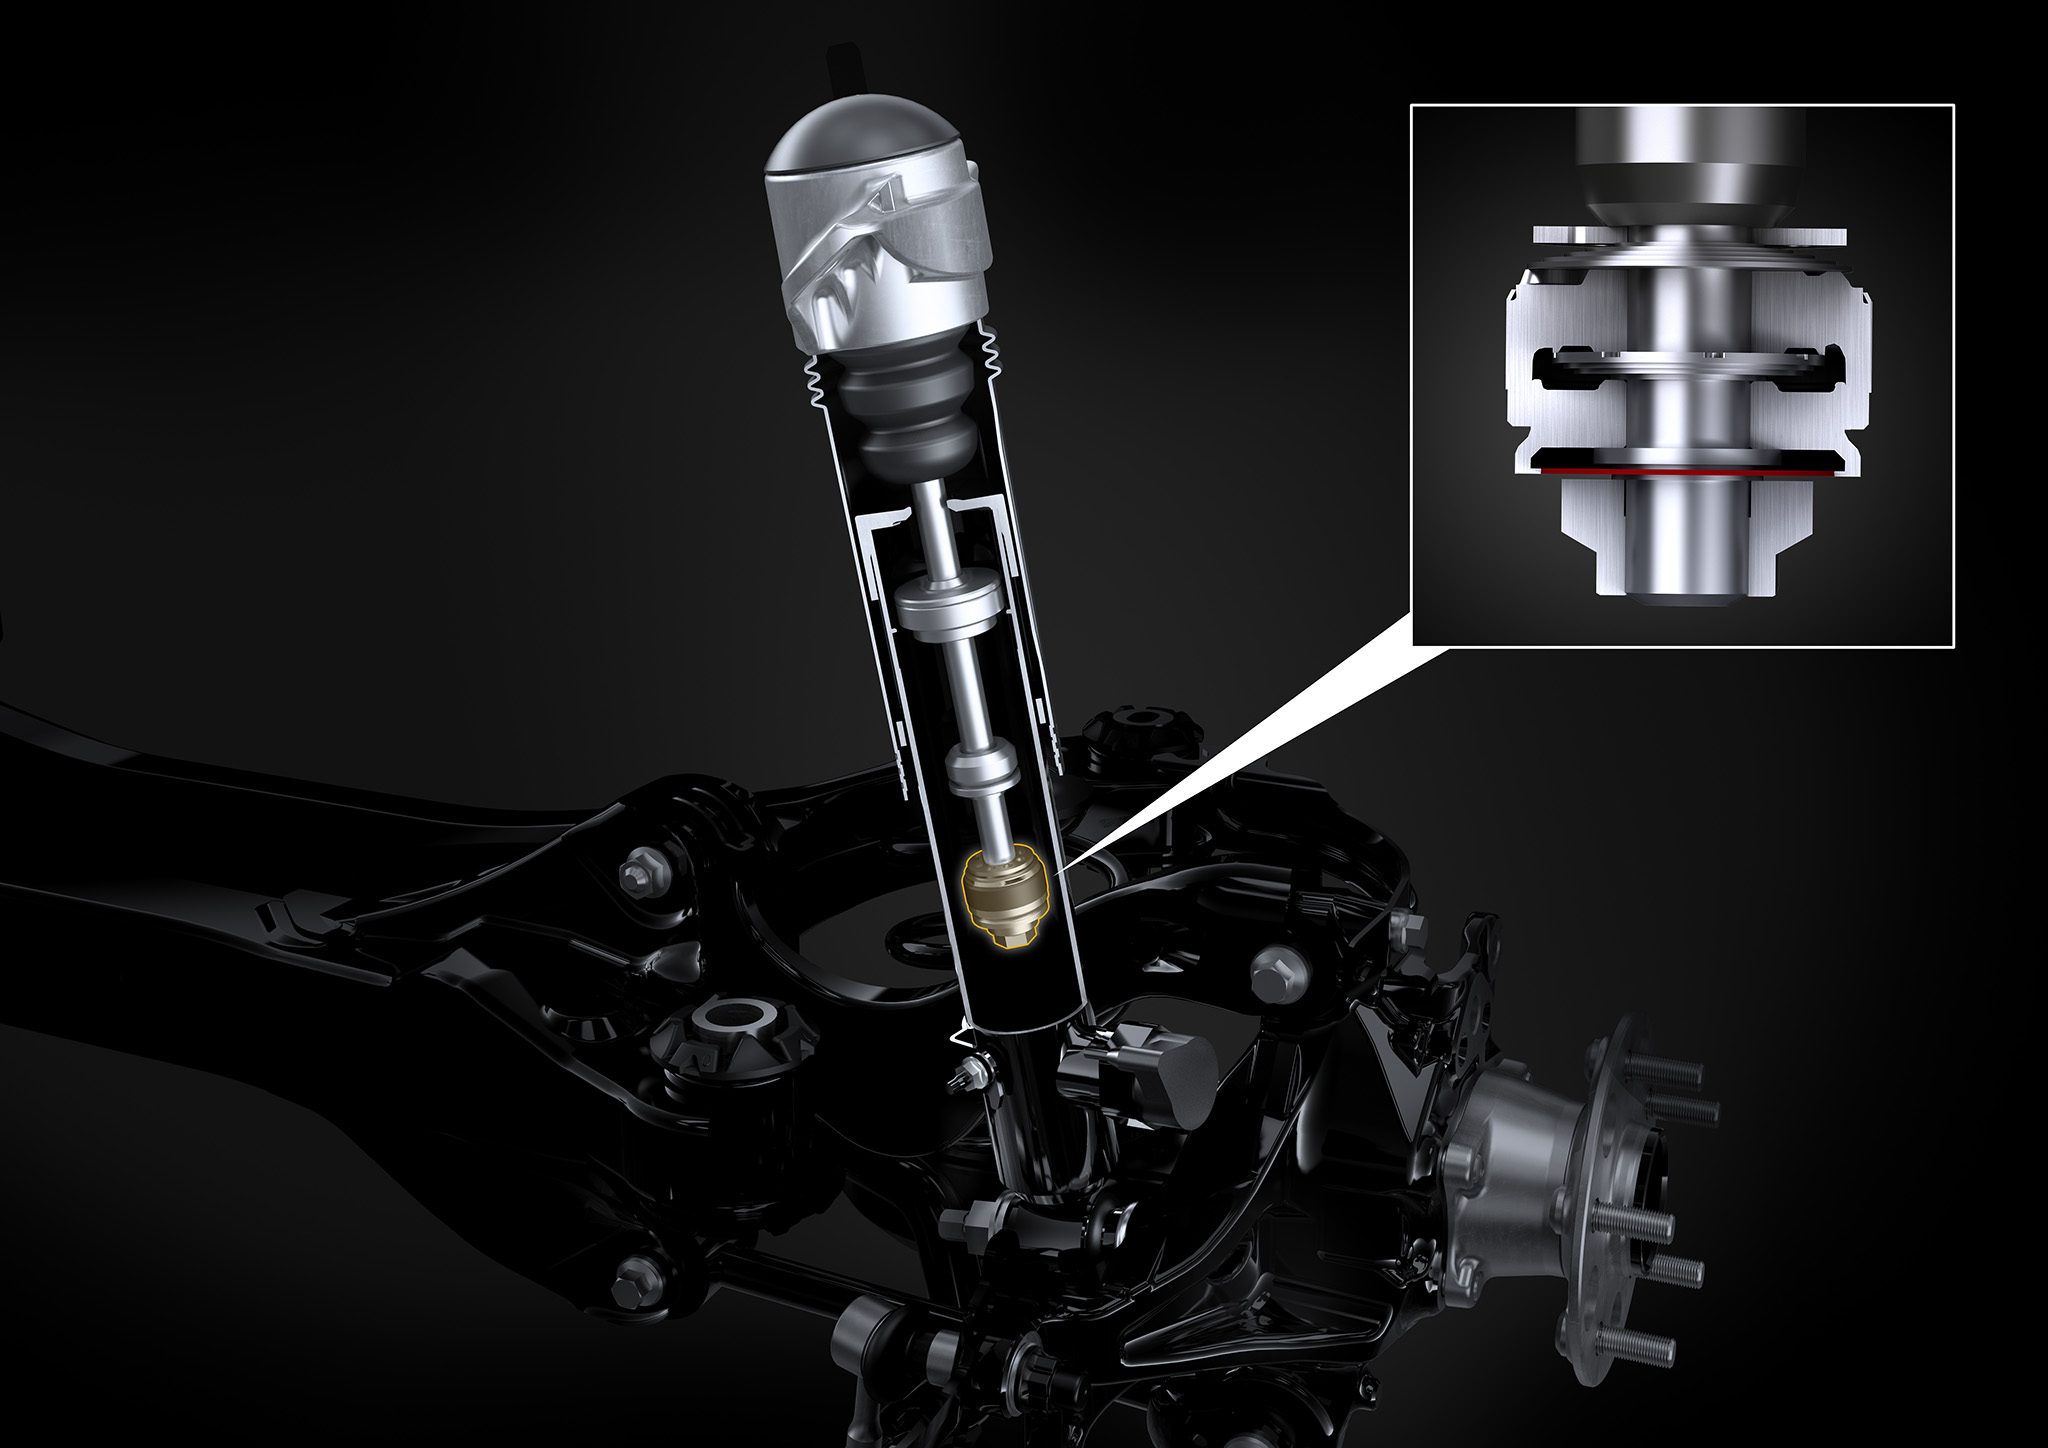 Lexus Pushes the Boundaries of Ride Comfort With World-First Suspension